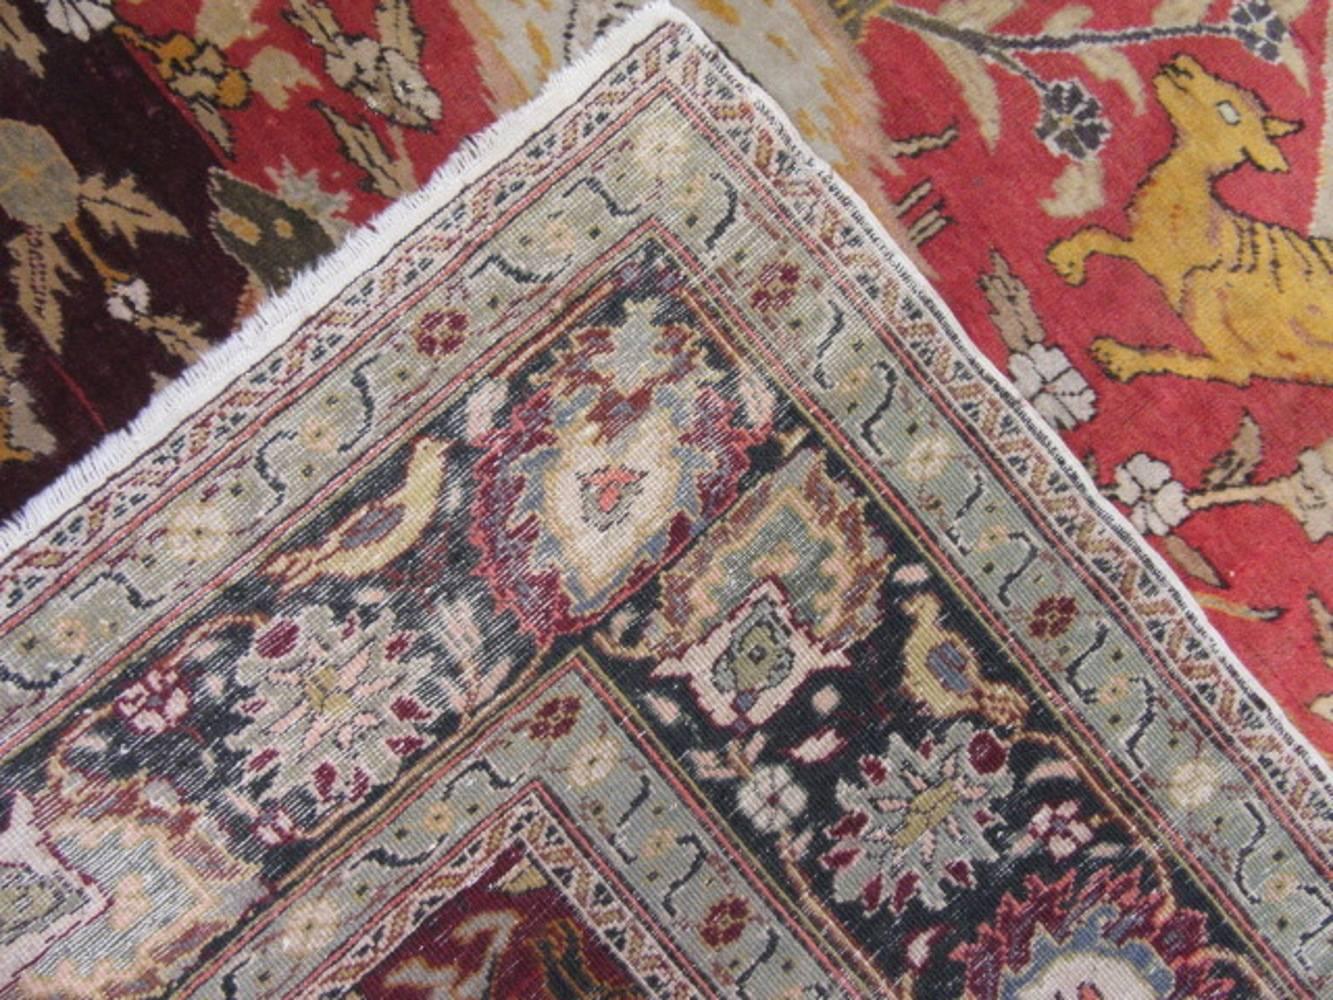 20th Century Small Semi-Antique Hand-Knotted Wool Pictorial Turkish Rug